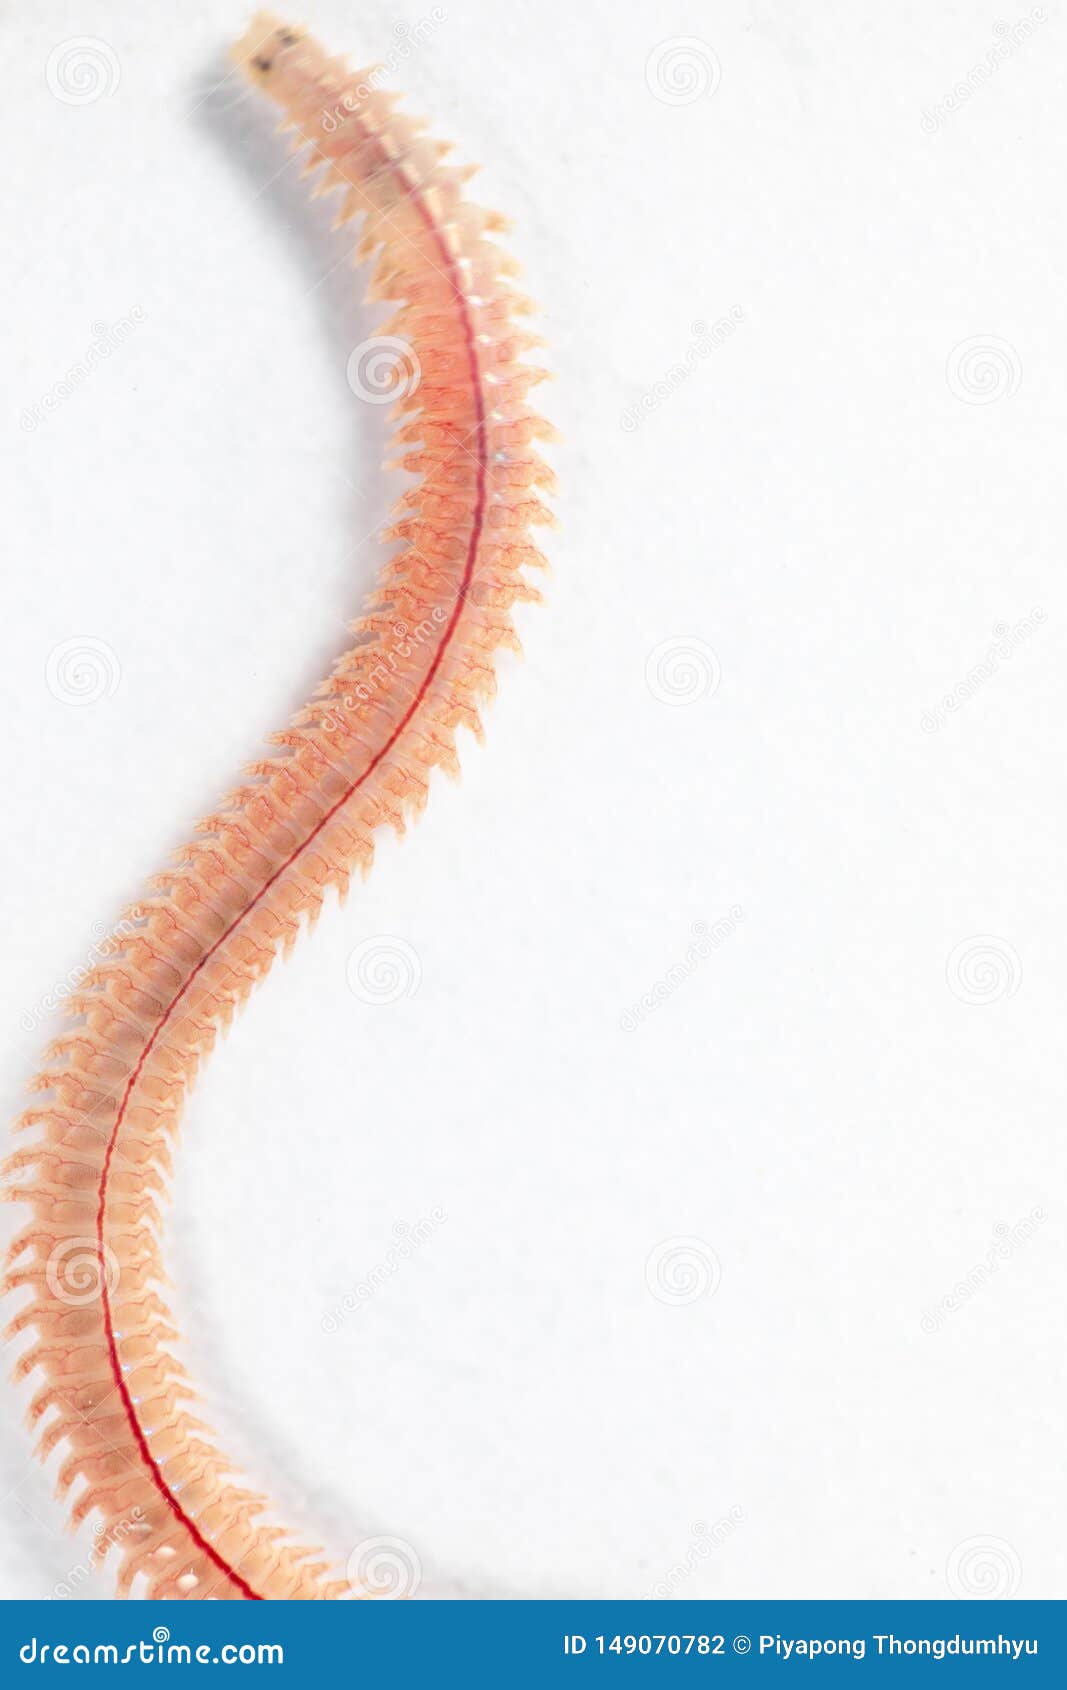 Sand Worm (Perinereis sp.) is the same species as sea worms